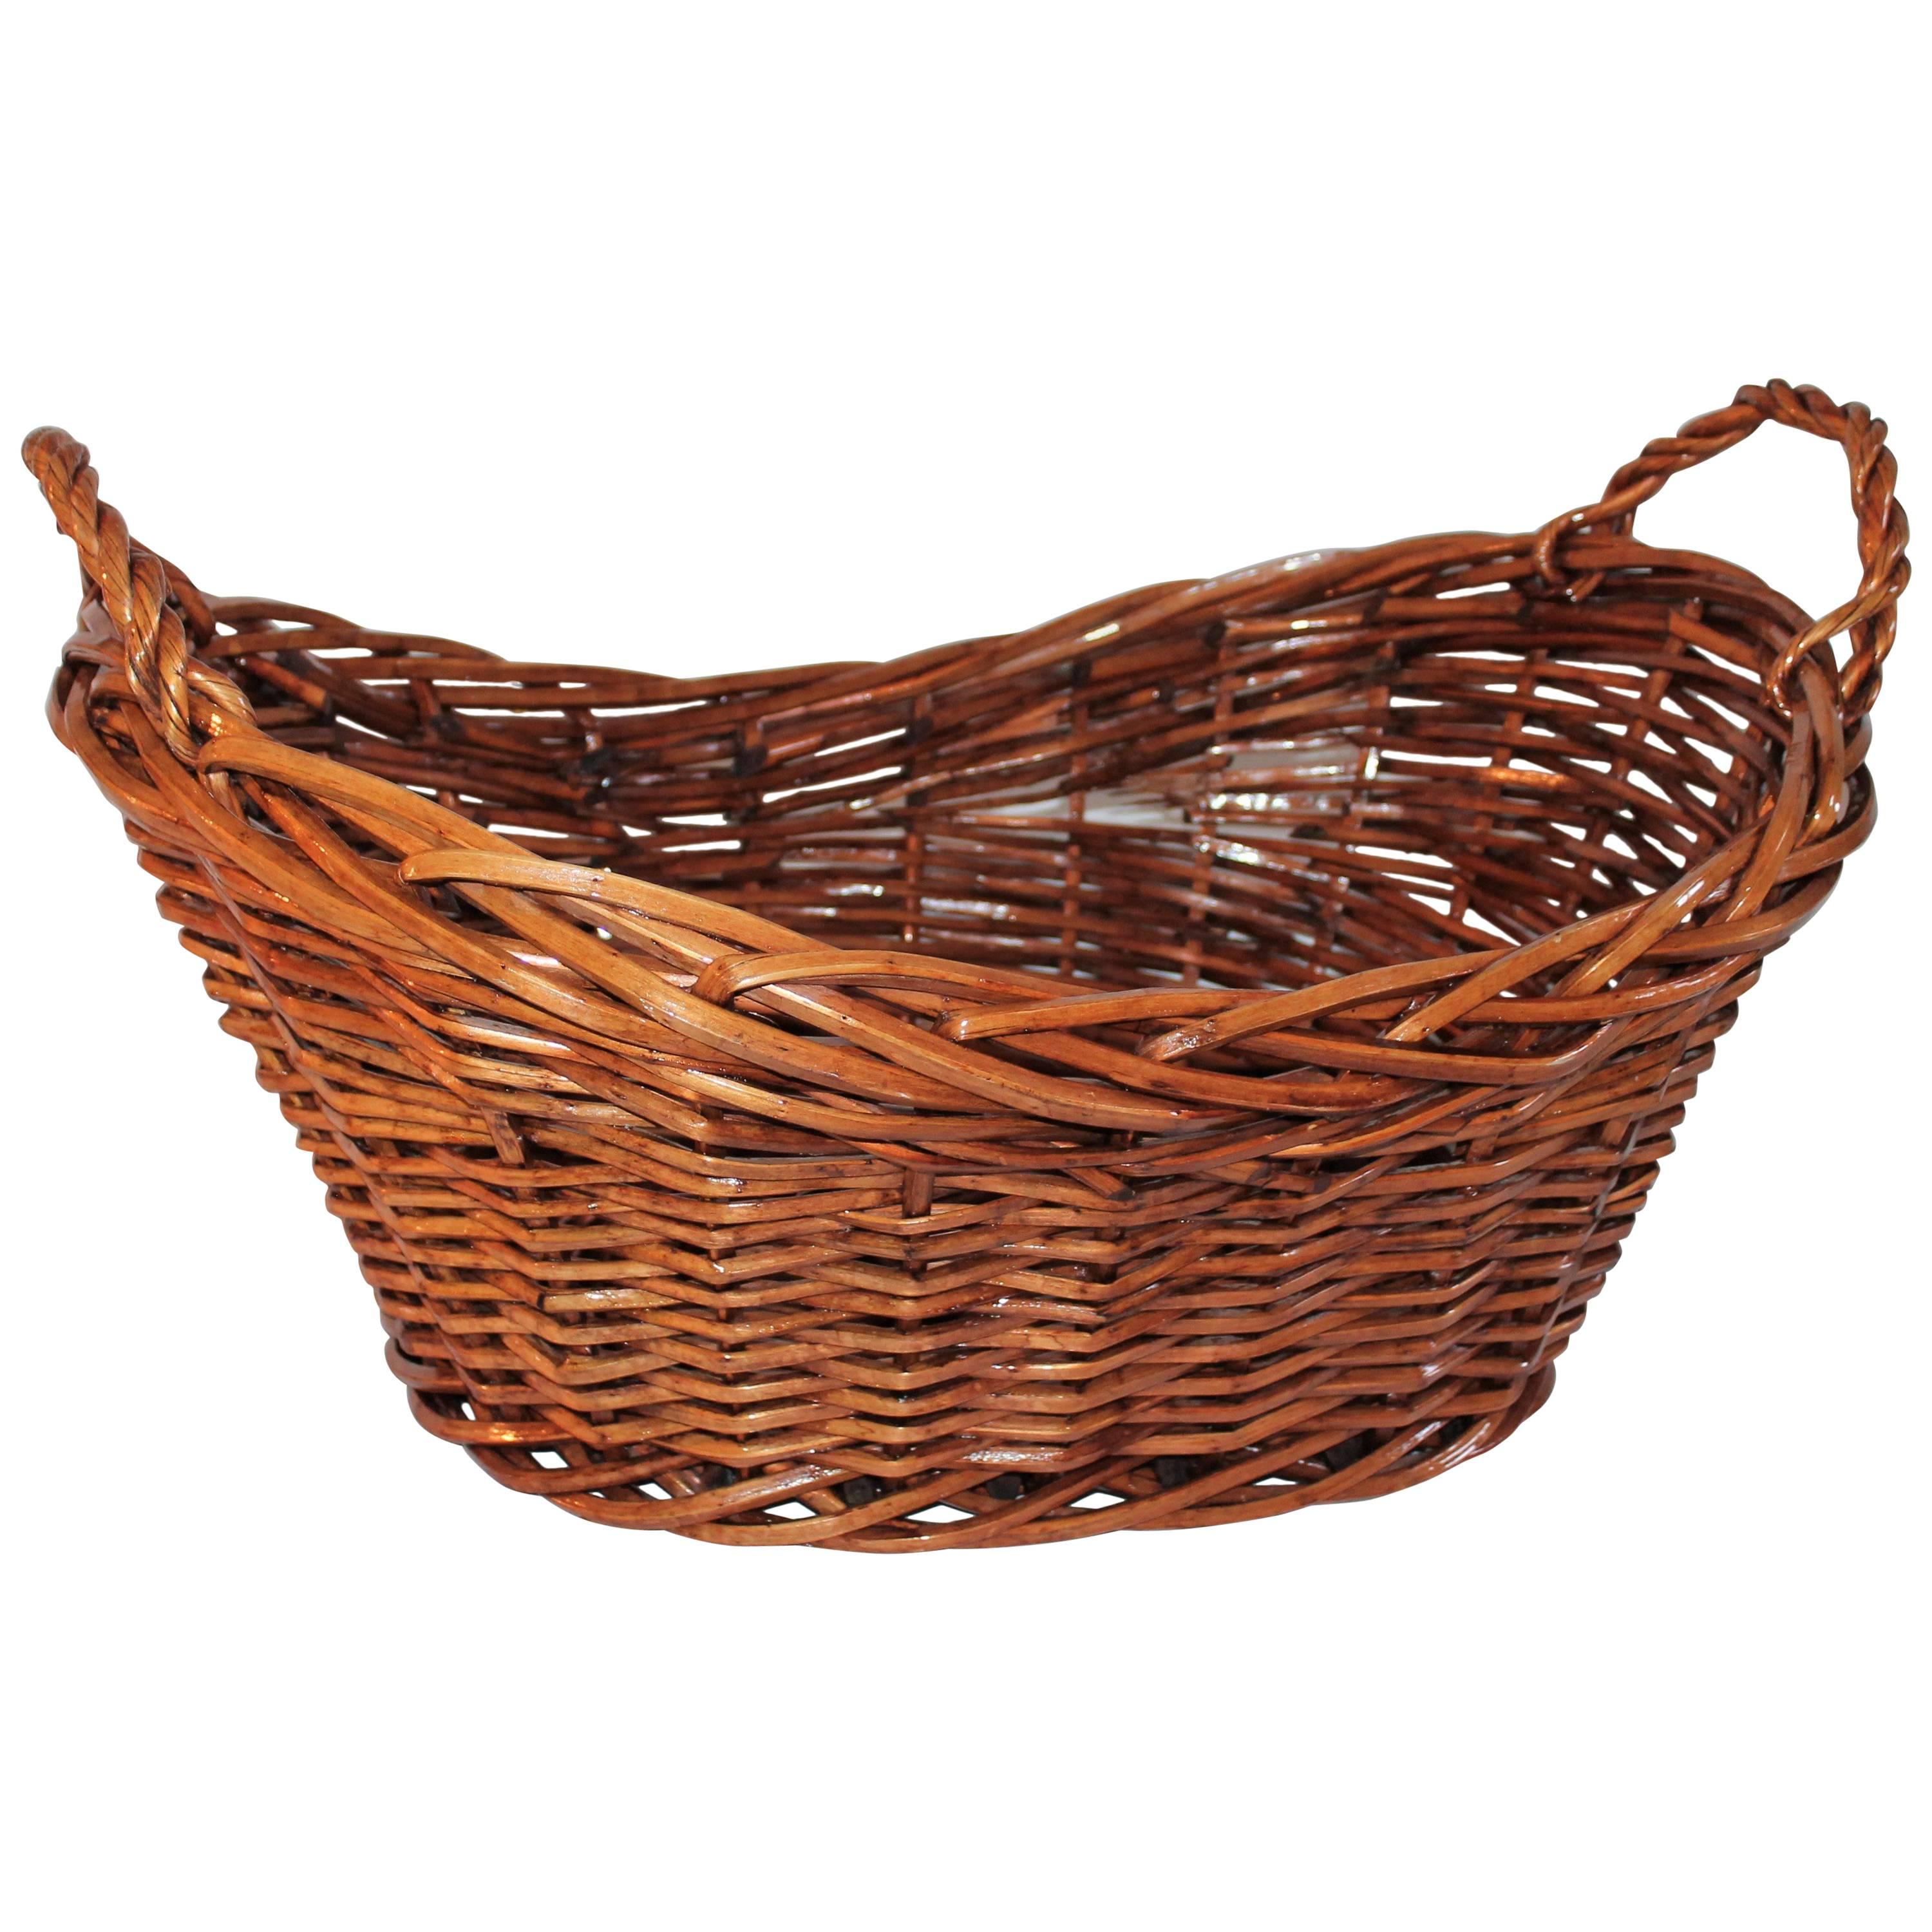 19th Century Willow Laundry Basket with Double Handles